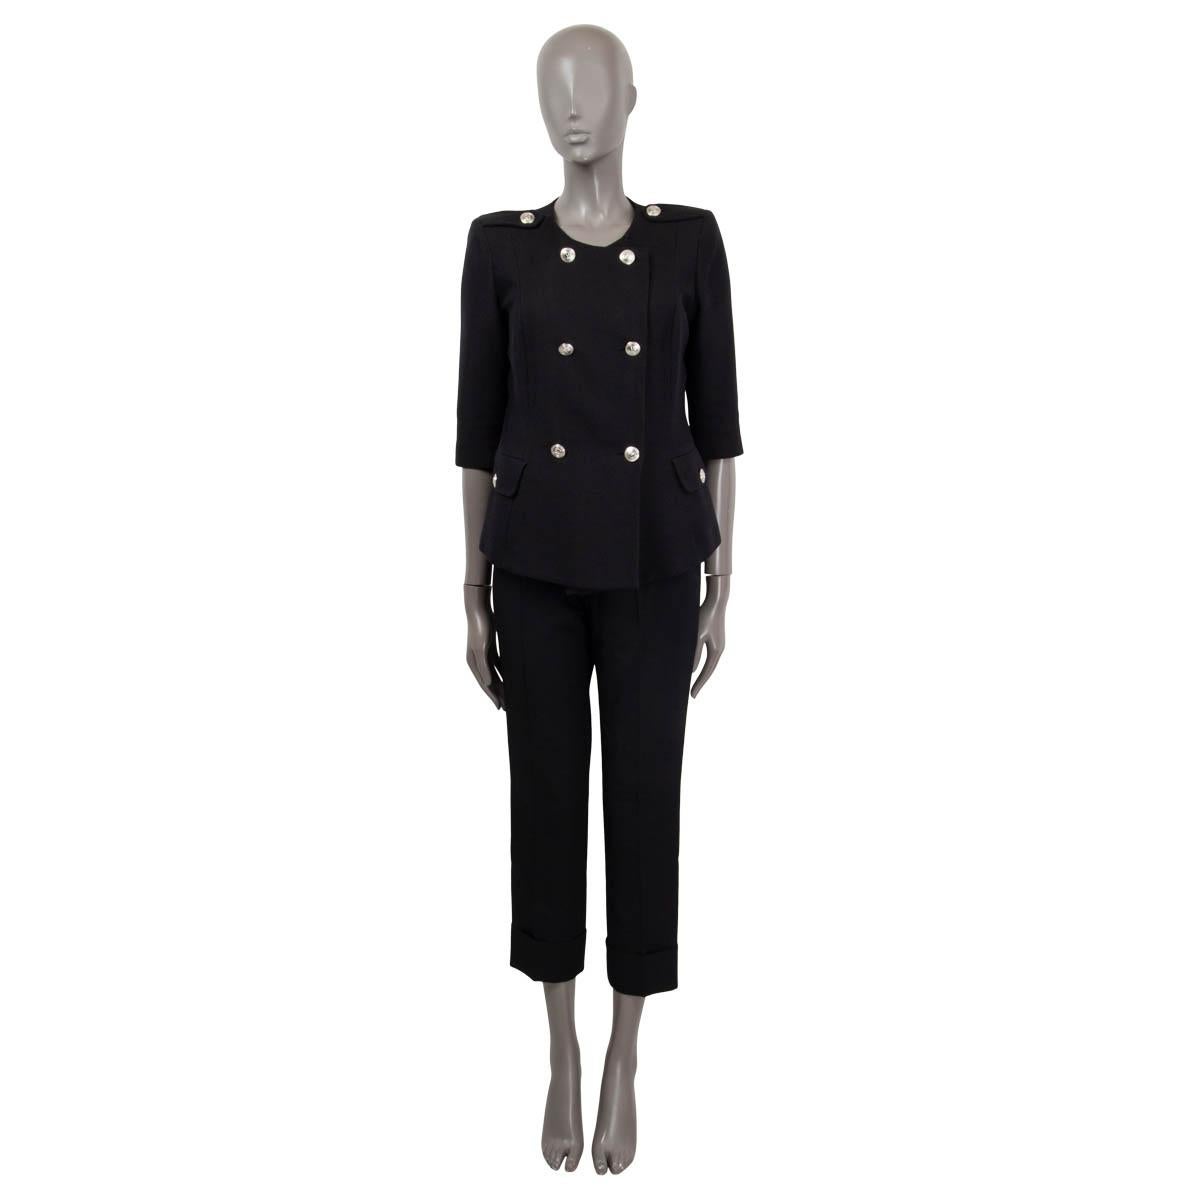 100% authentic Pierre Balmain double breasted blazer in black cotton (72%) and viscose (28%). Features epaulettes on the shoulders, 3/4 sleeves and two buttoned flap pockets on the front. Opens with buttons on the front. Lined in black viscose (52%)